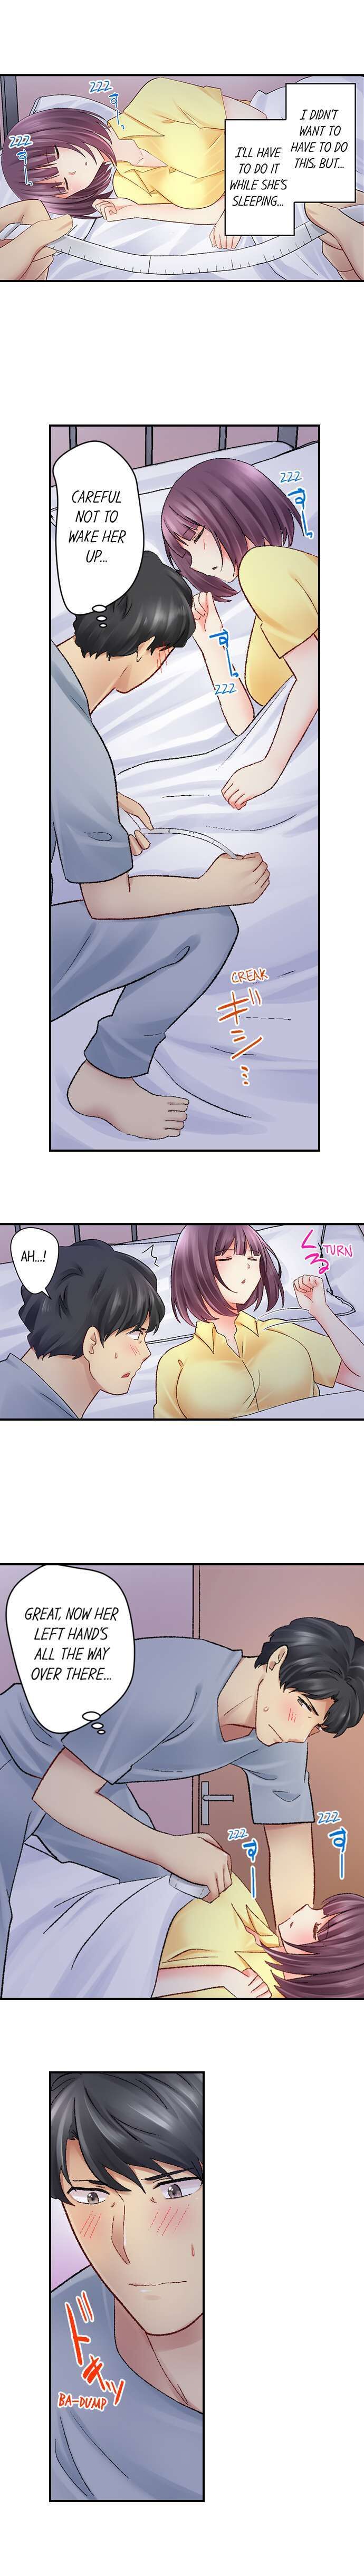 Our Kinky Newlywed Life - Chapter 31 Page 6